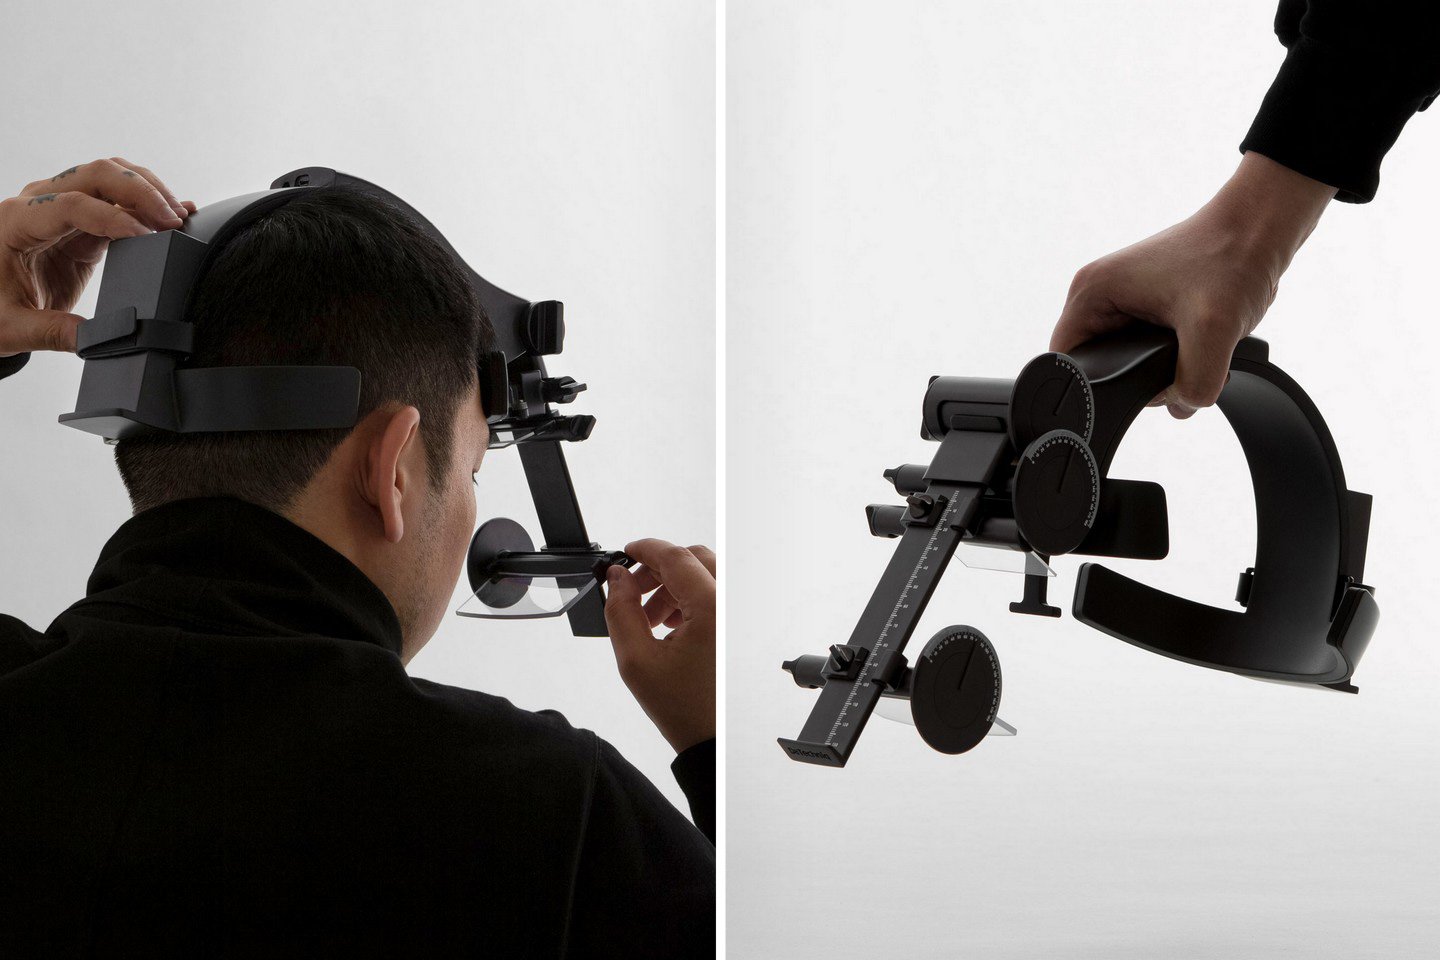 AR measuring instrument was designed to help make better, ergonomic augmented reality displays